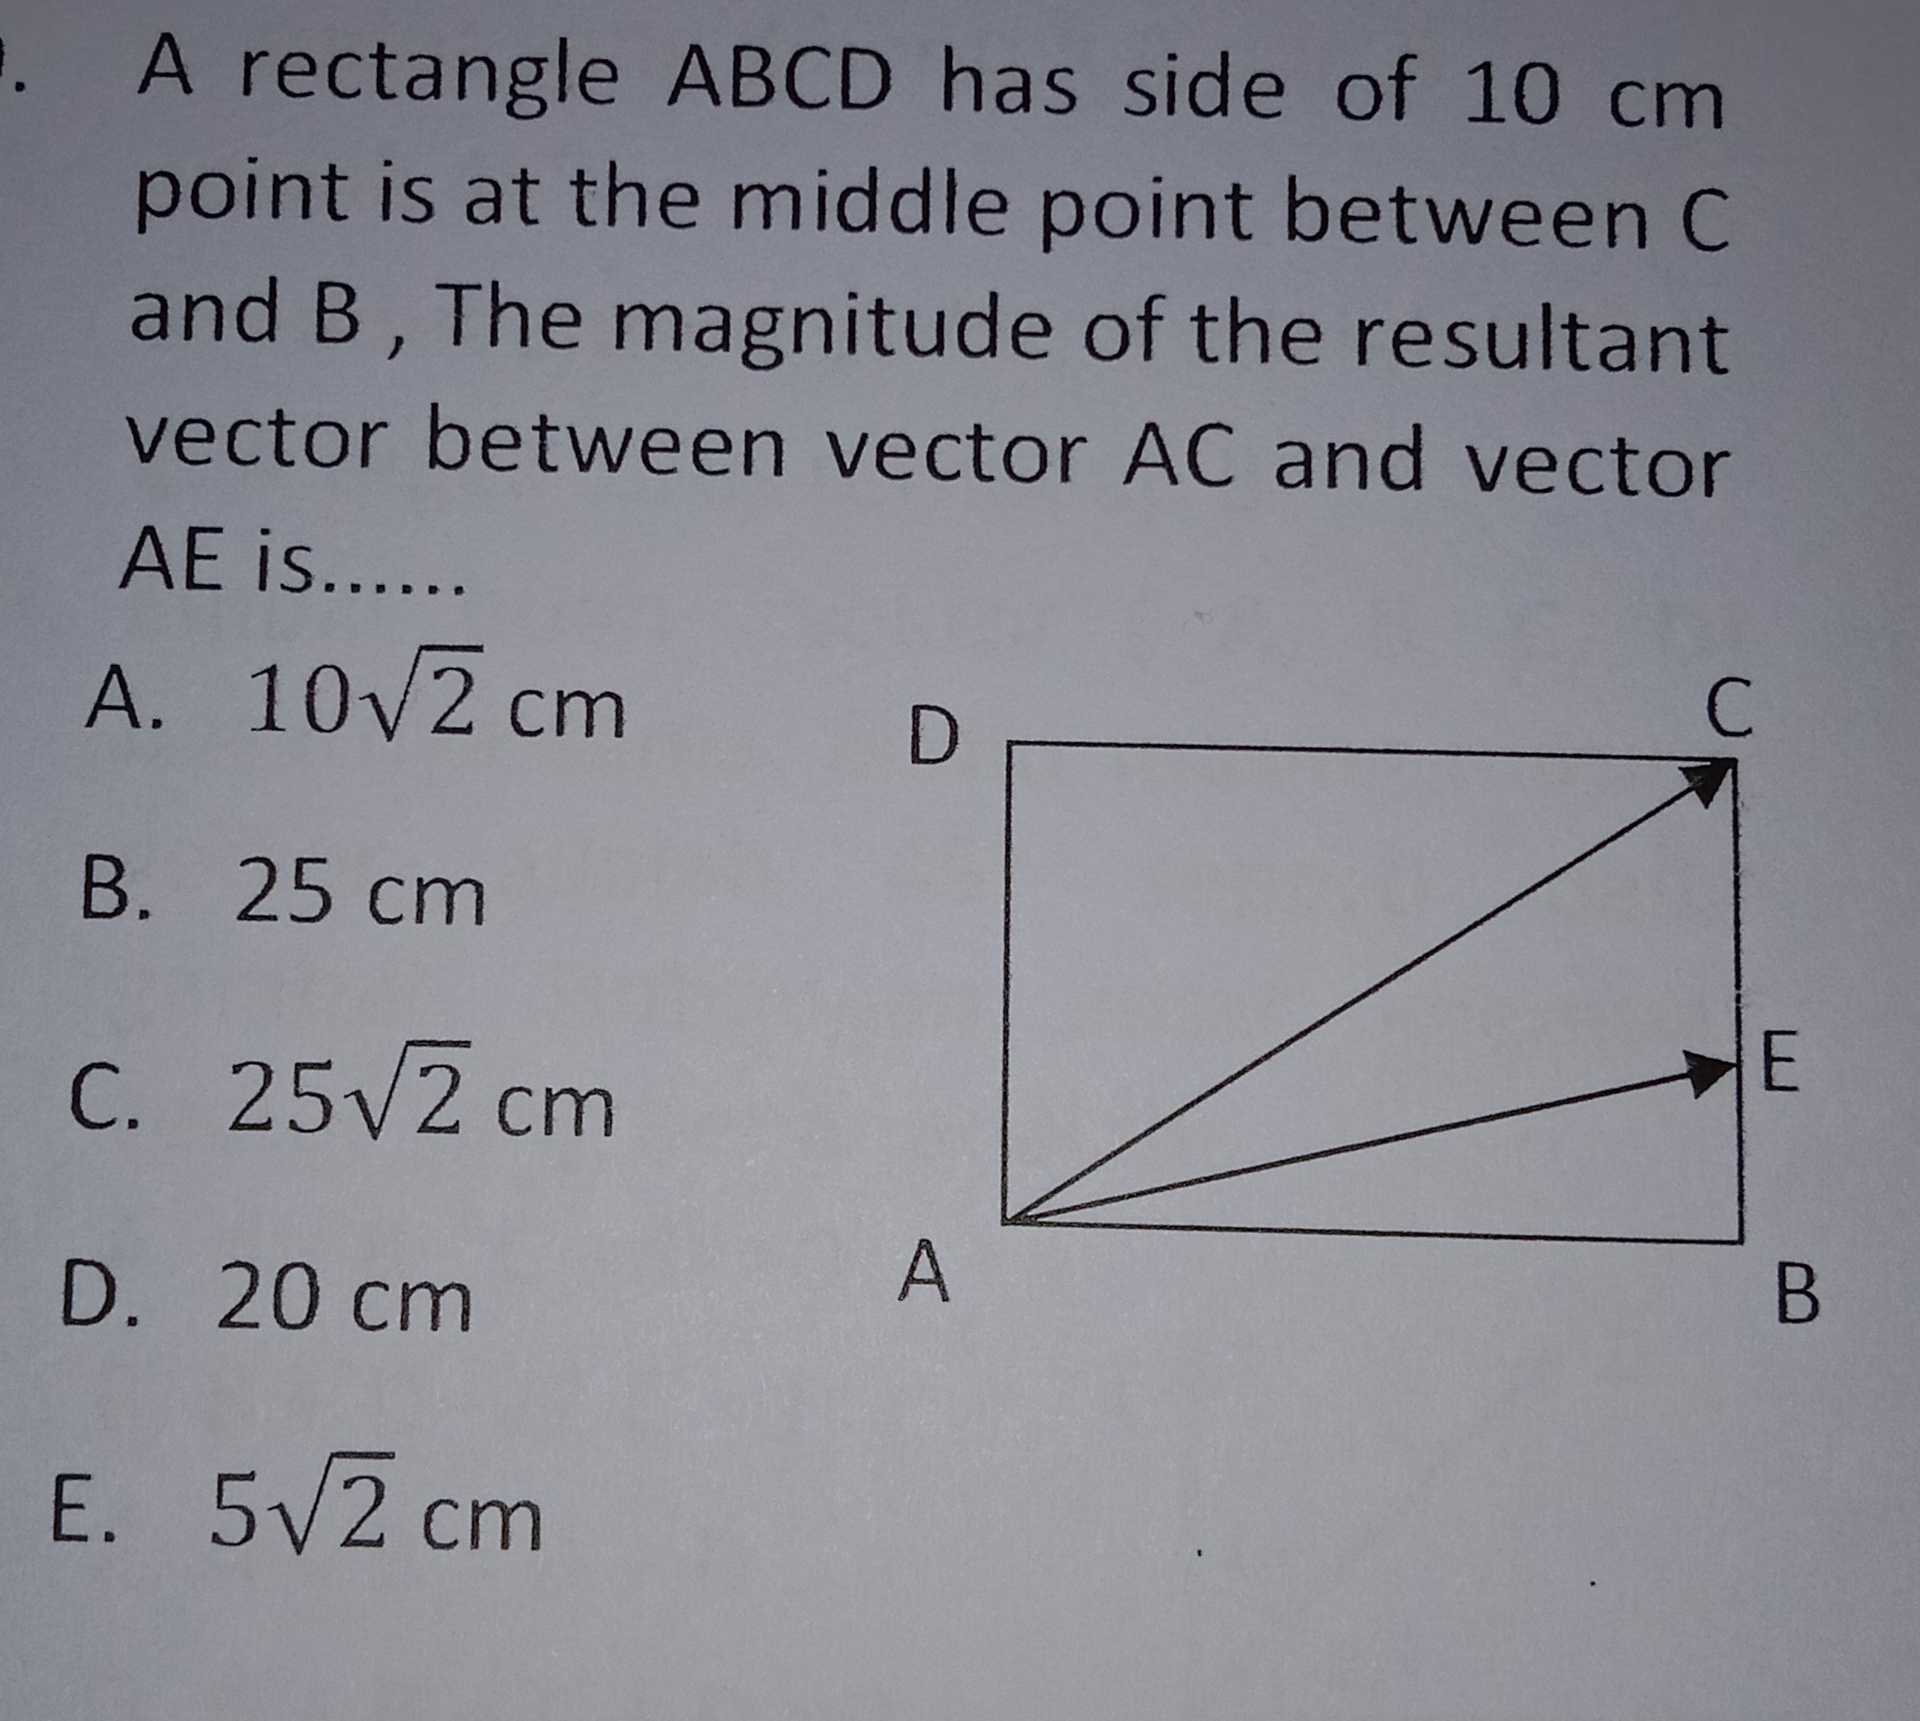 A rectangle ABCD has side of 10 cm point is at the middle point between C and B, The magnitude of the resultant vector between vector AC and vector AE is...... A. 102 cm C С D B. 25 cm į i j C. 25v2 cm E D. 20 cm A B E. 5V2 cm 